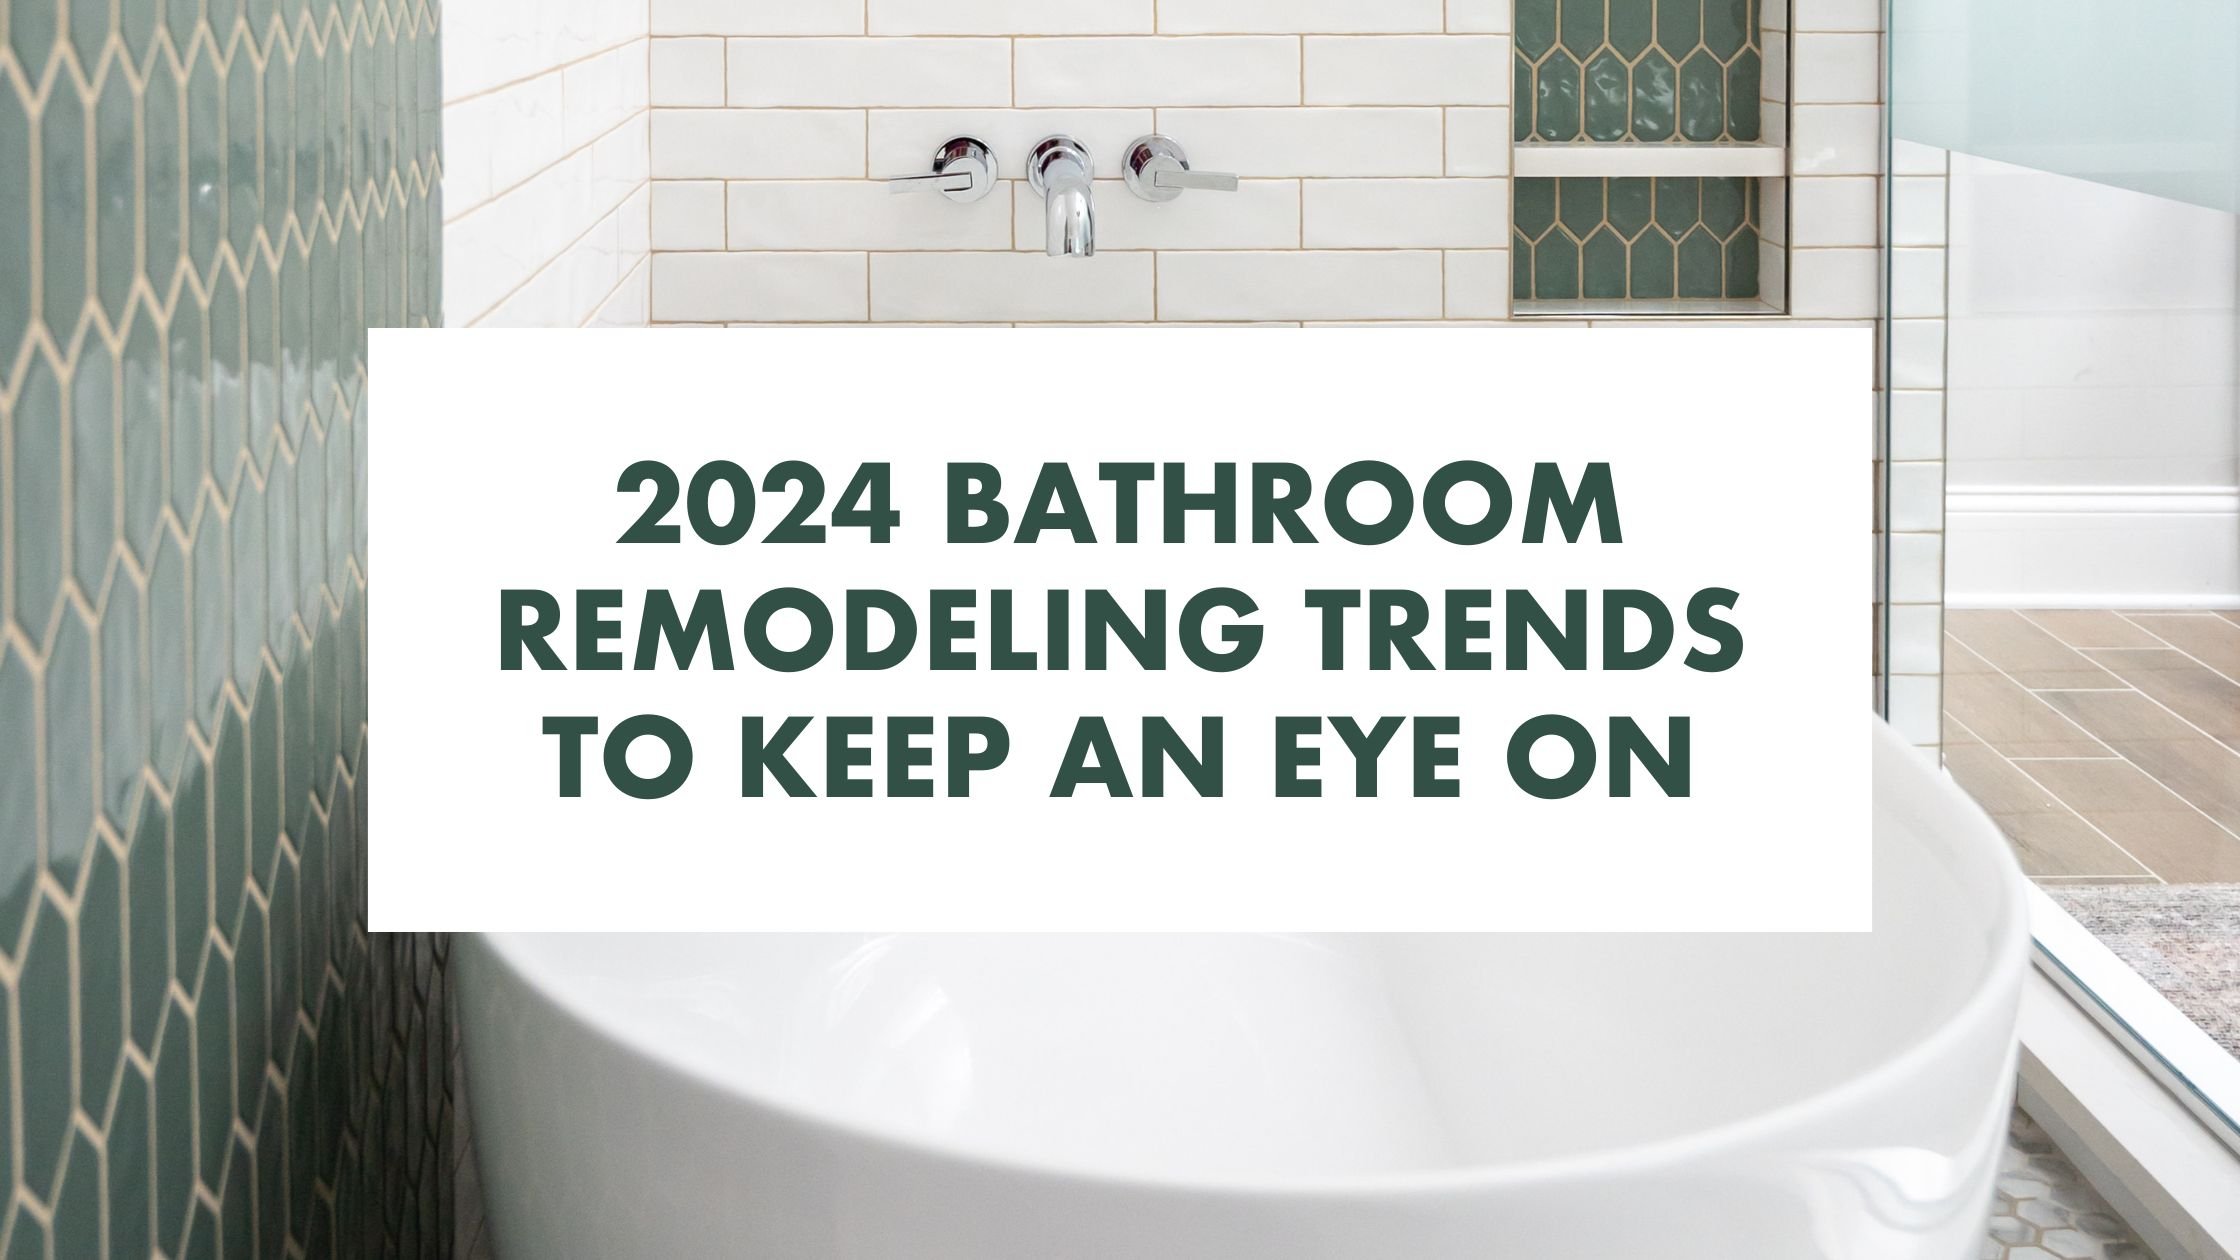 2024 Bathroom Remodeling Trends To Keep An Eye On